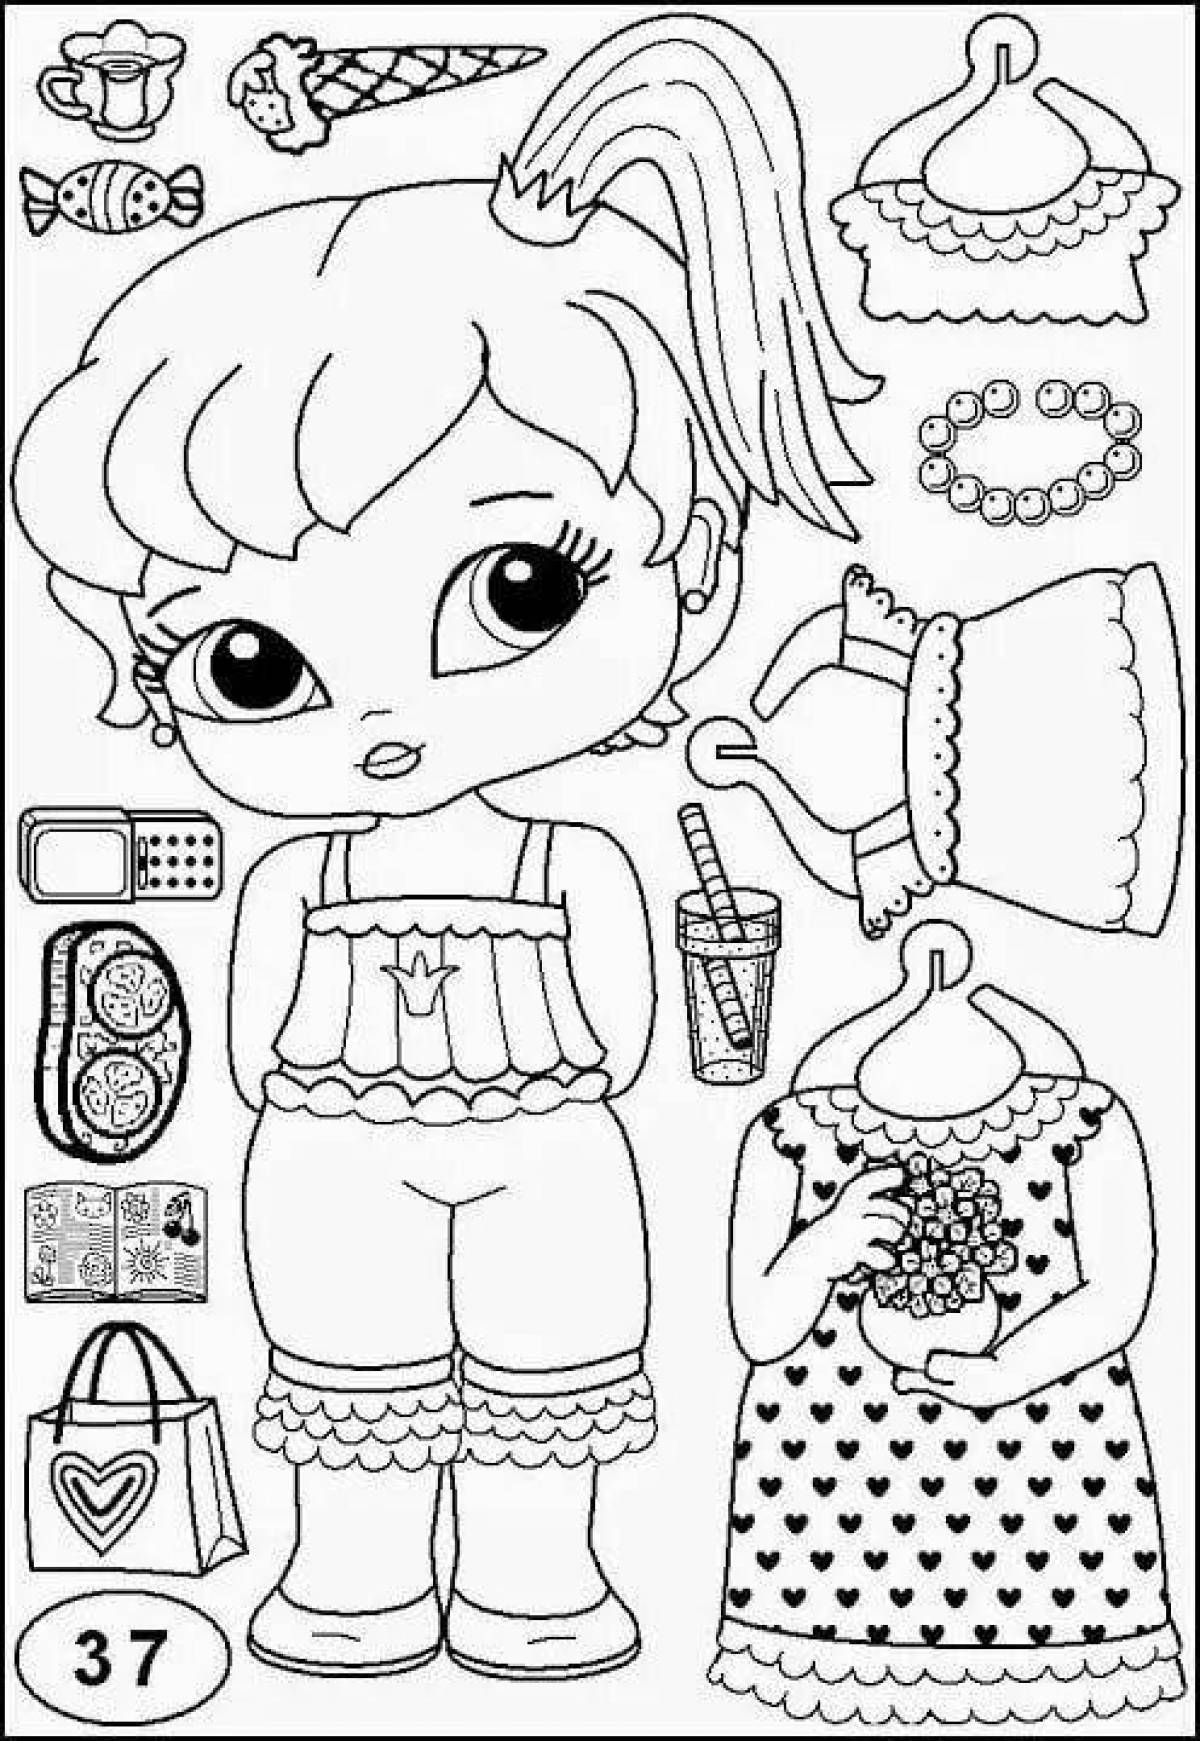 Cool coloring lol doll with clothes